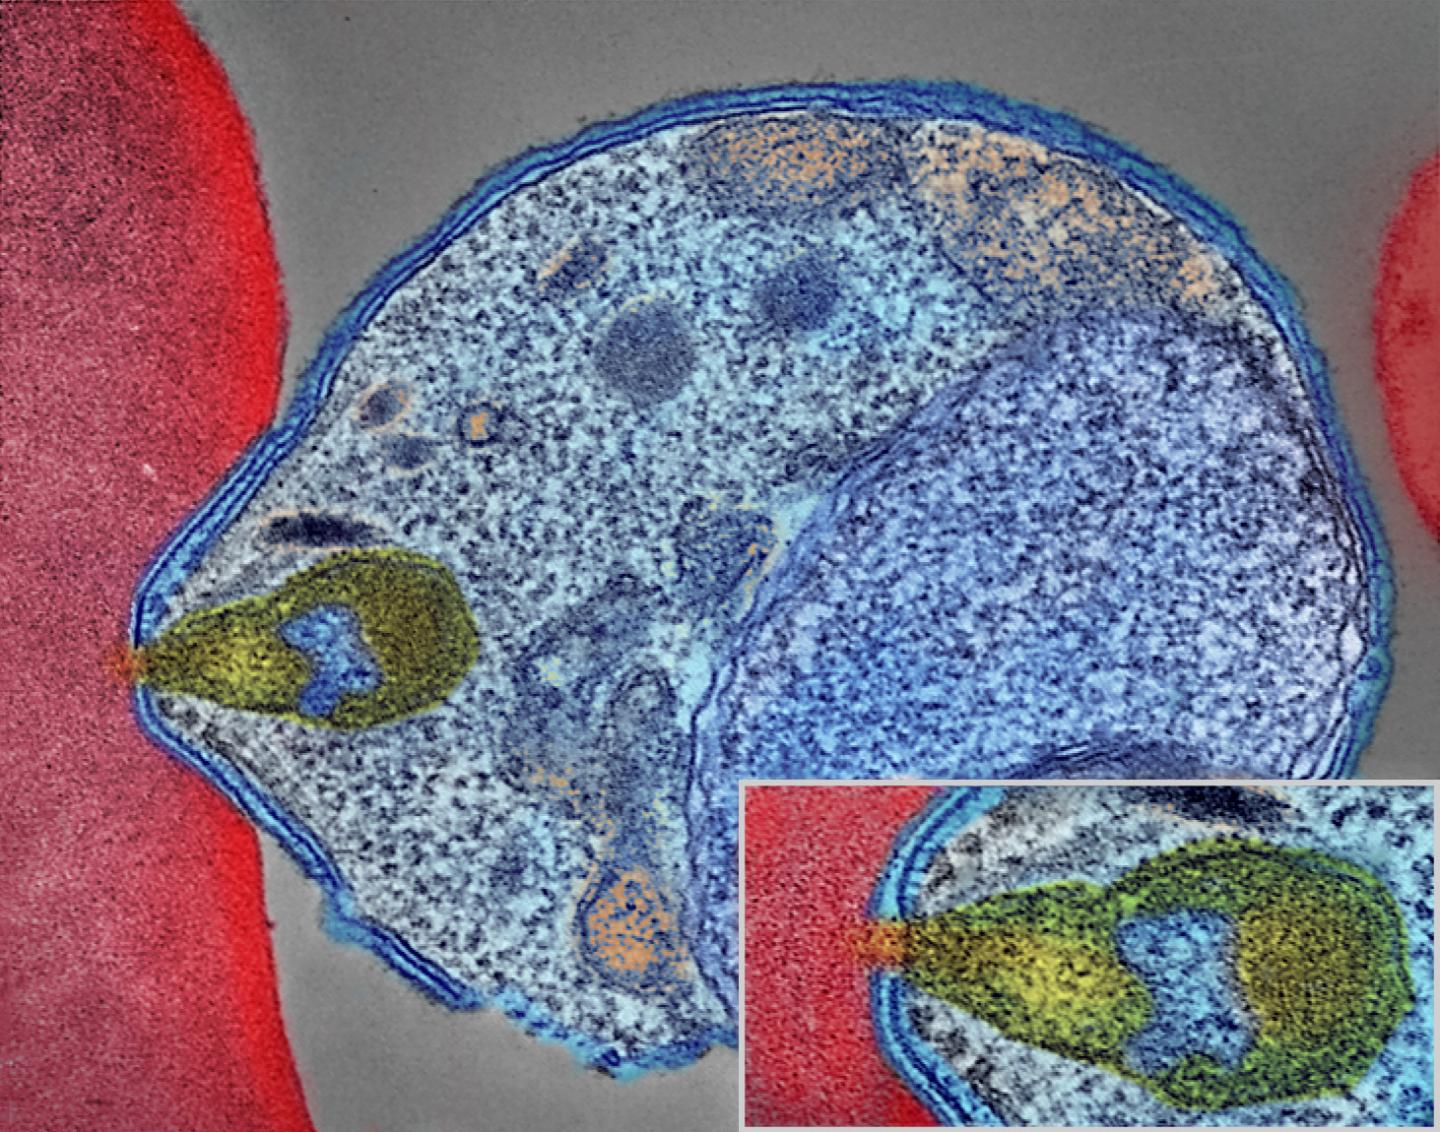 Colorized electron micrograph showing malaria parasite (right, blue) attaching to a human red blood cell. The inset shows a detail of the attachment point at higher magnification. [NIAID]